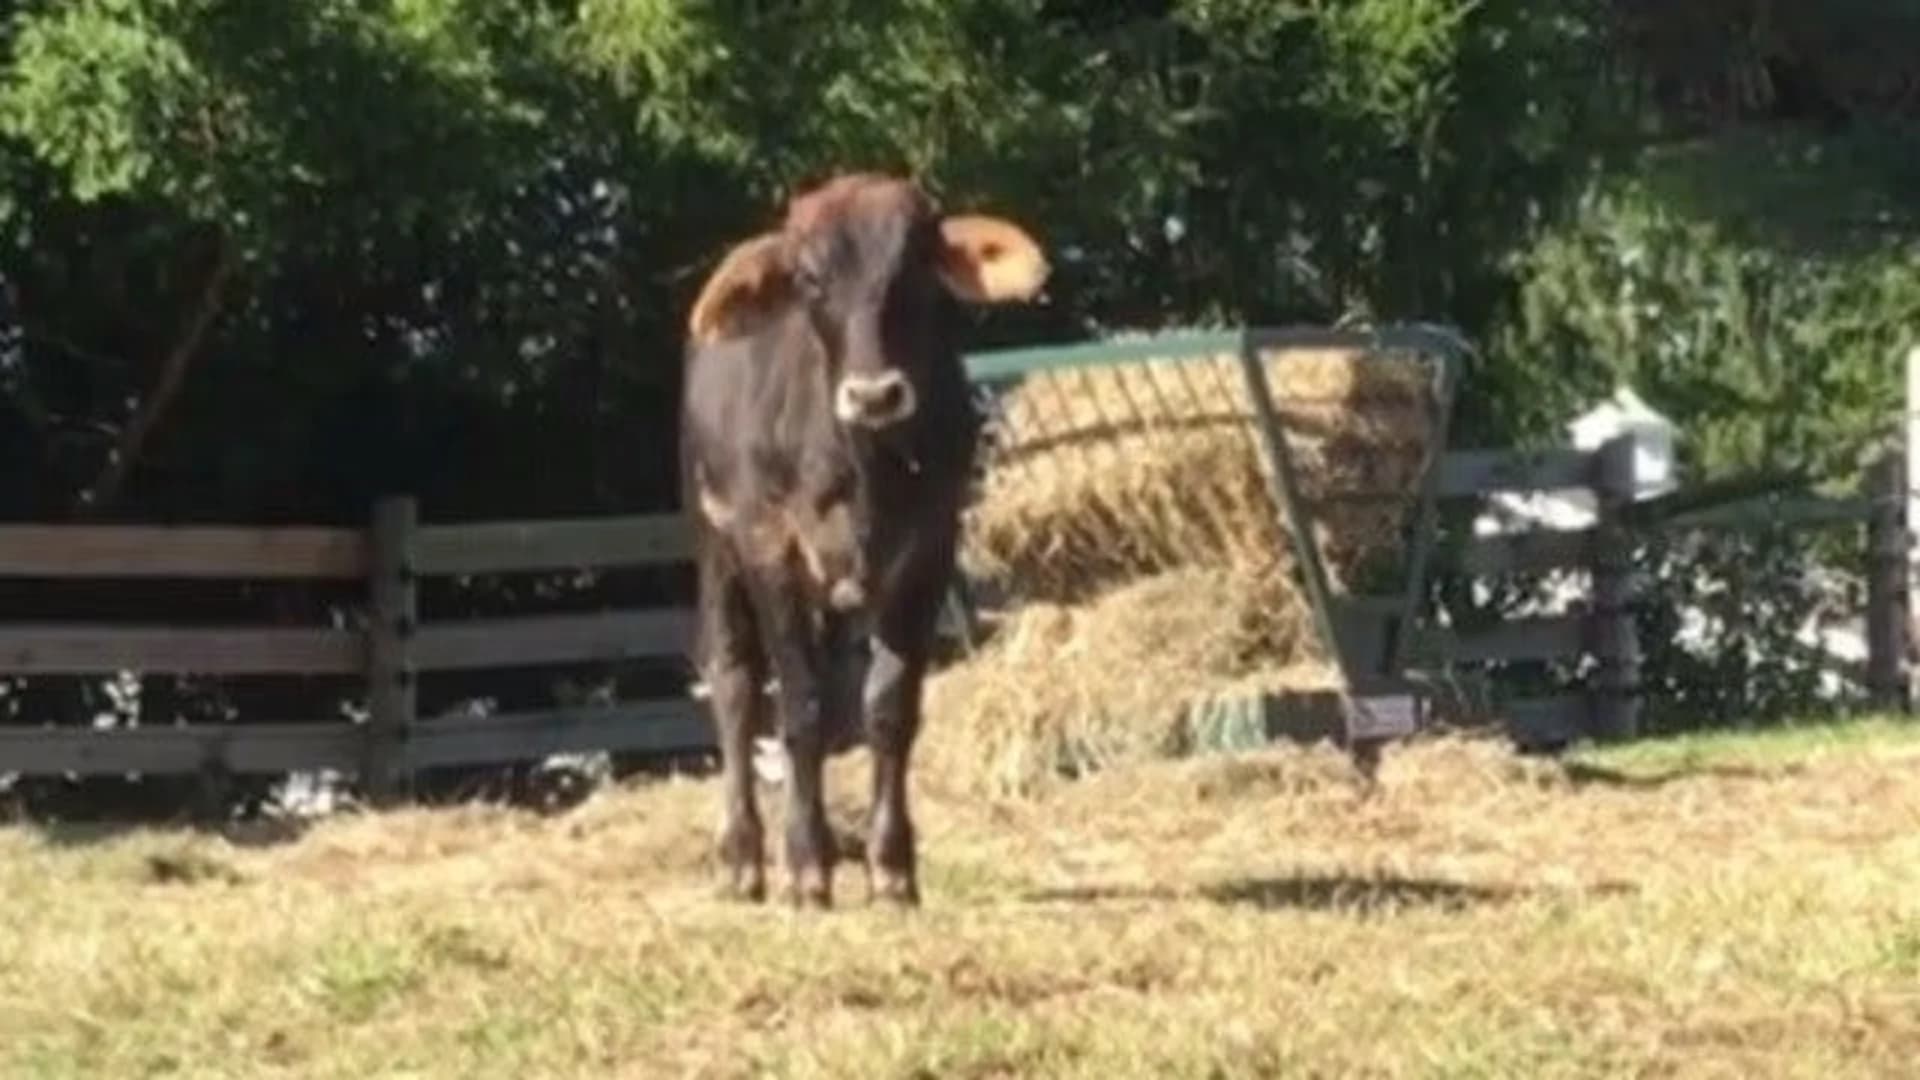 Escaped Brooklyn bull to remain at NJ animal sanctuary